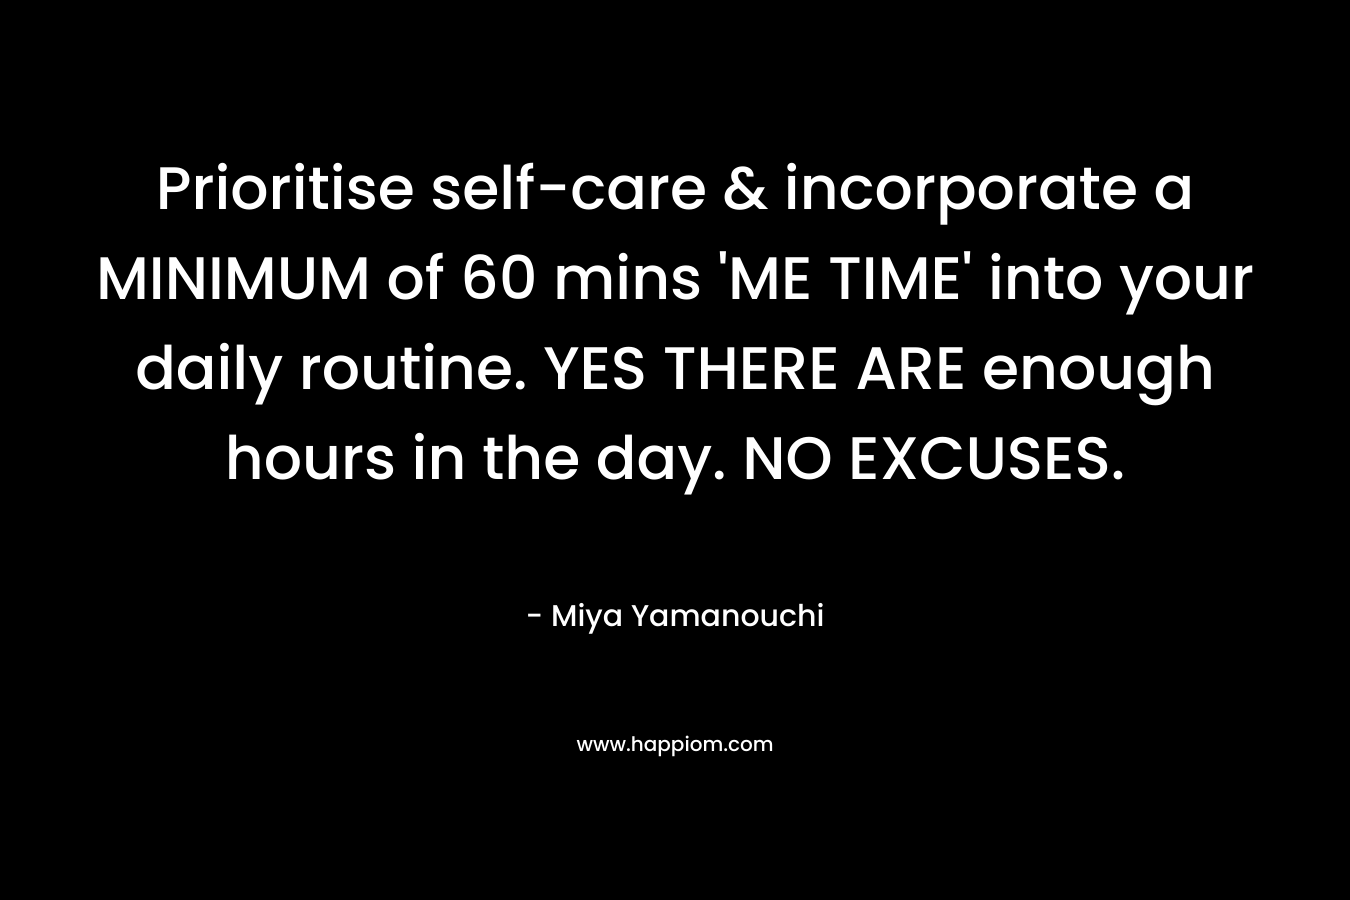 Prioritise self-care & incorporate a MINIMUM of 60 mins 'ME TIME' into your daily routine. YES THERE ARE enough hours in the day. NO EXCUSES.